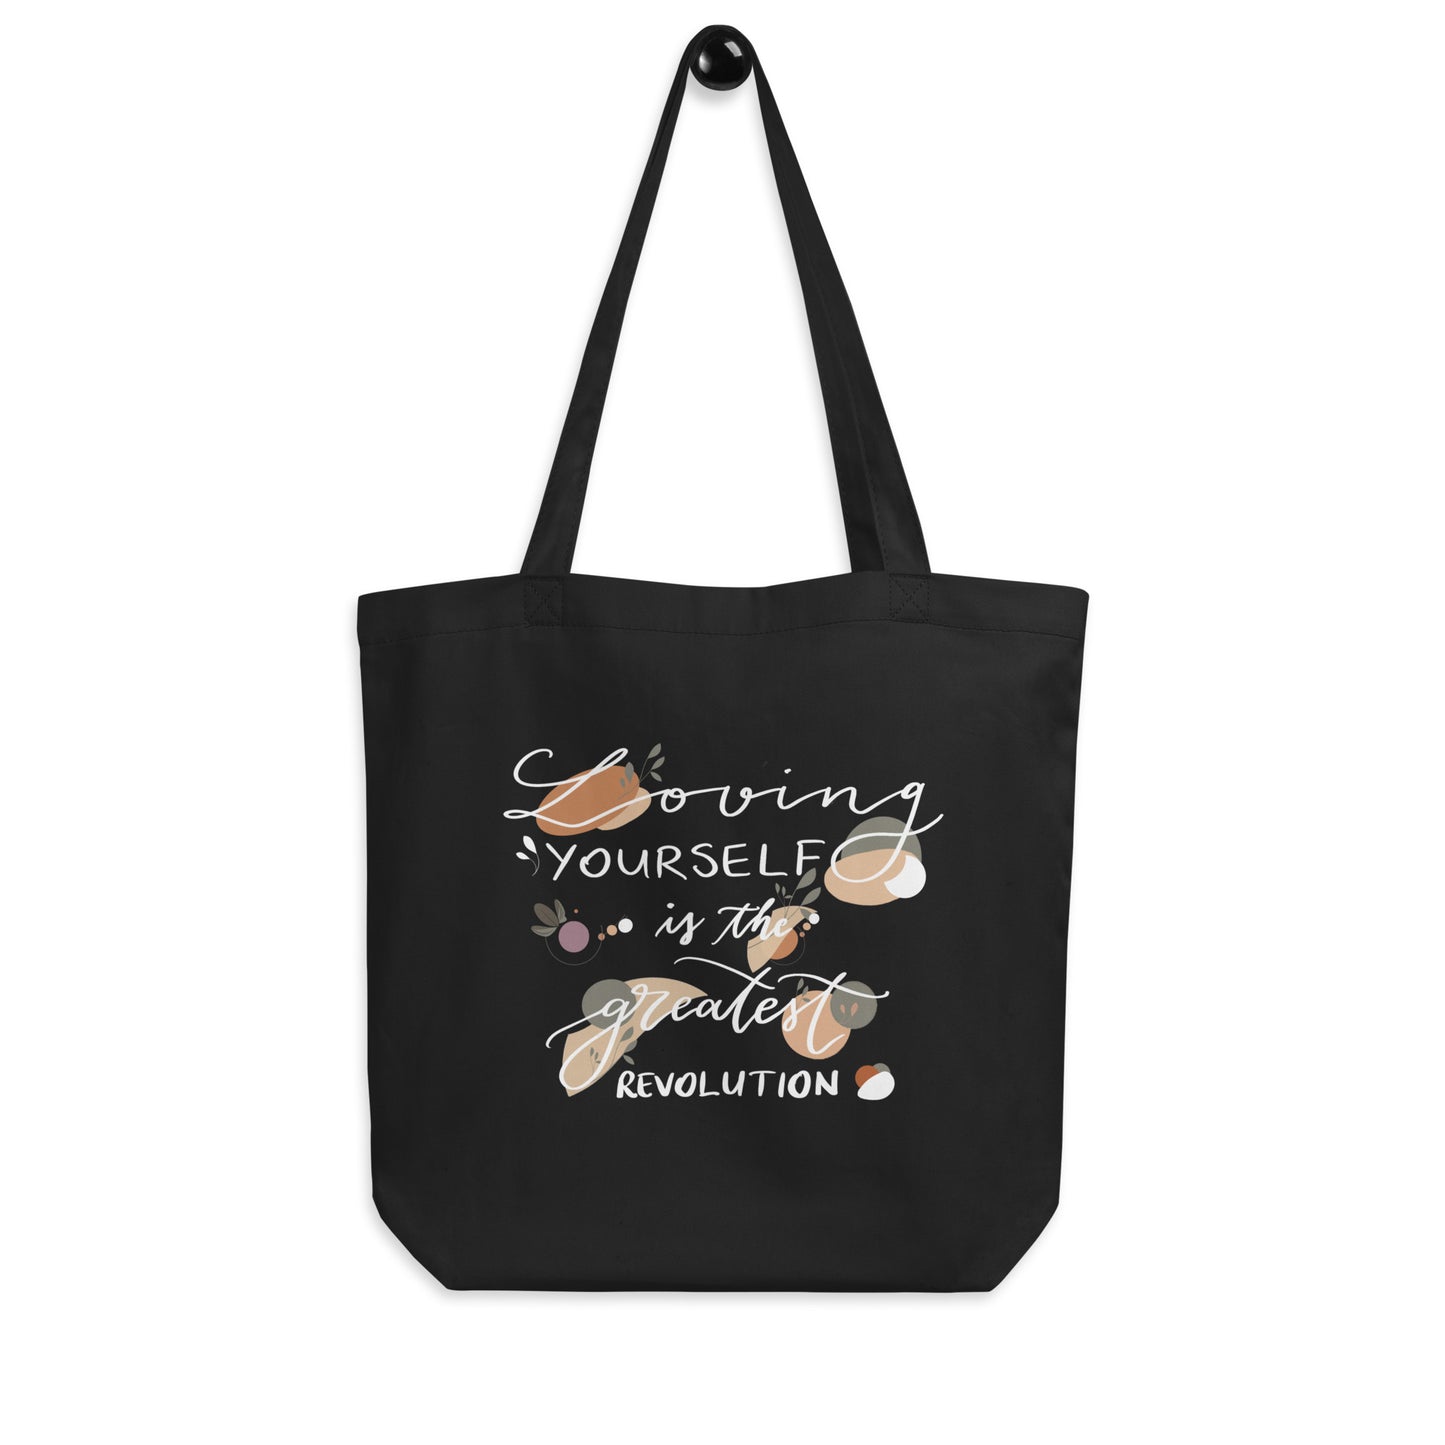 Tote bag "Loving yourself"